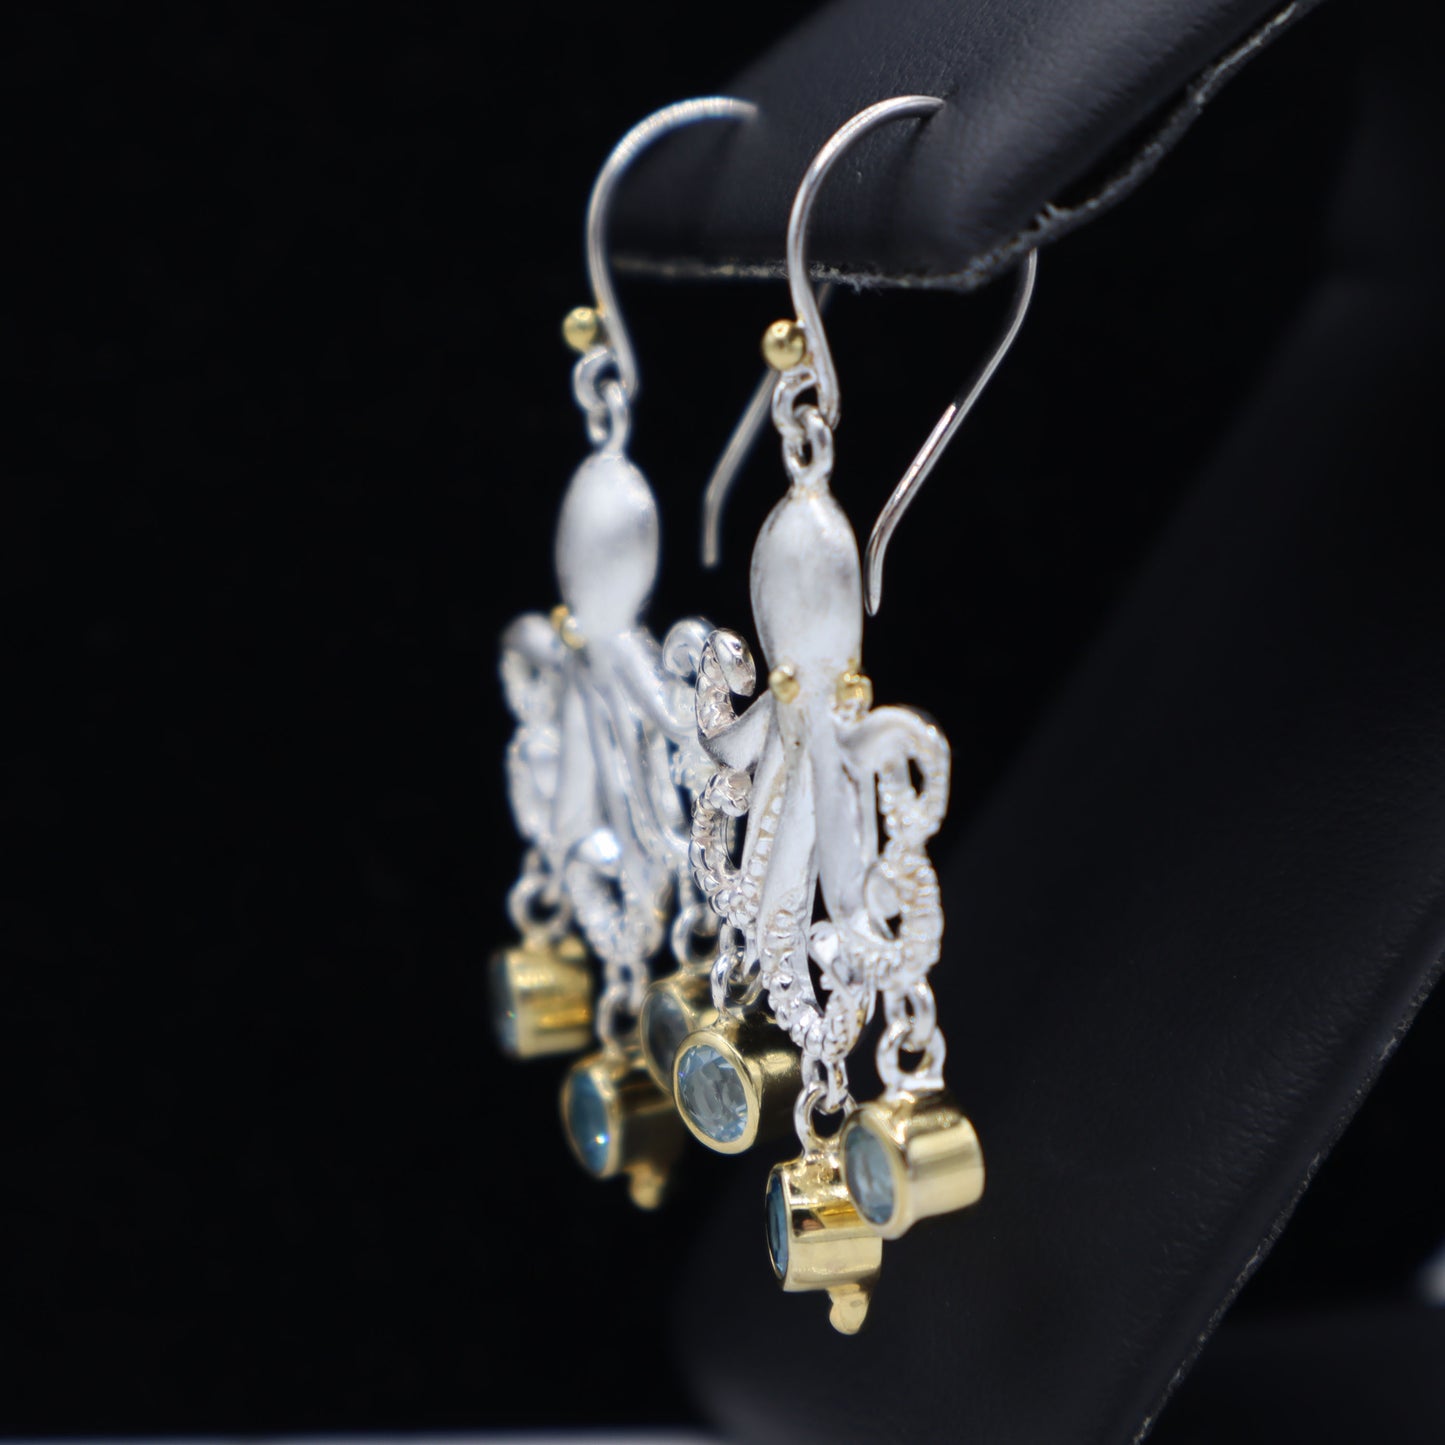 Silver and Topaz Octopus Dangle Earrings